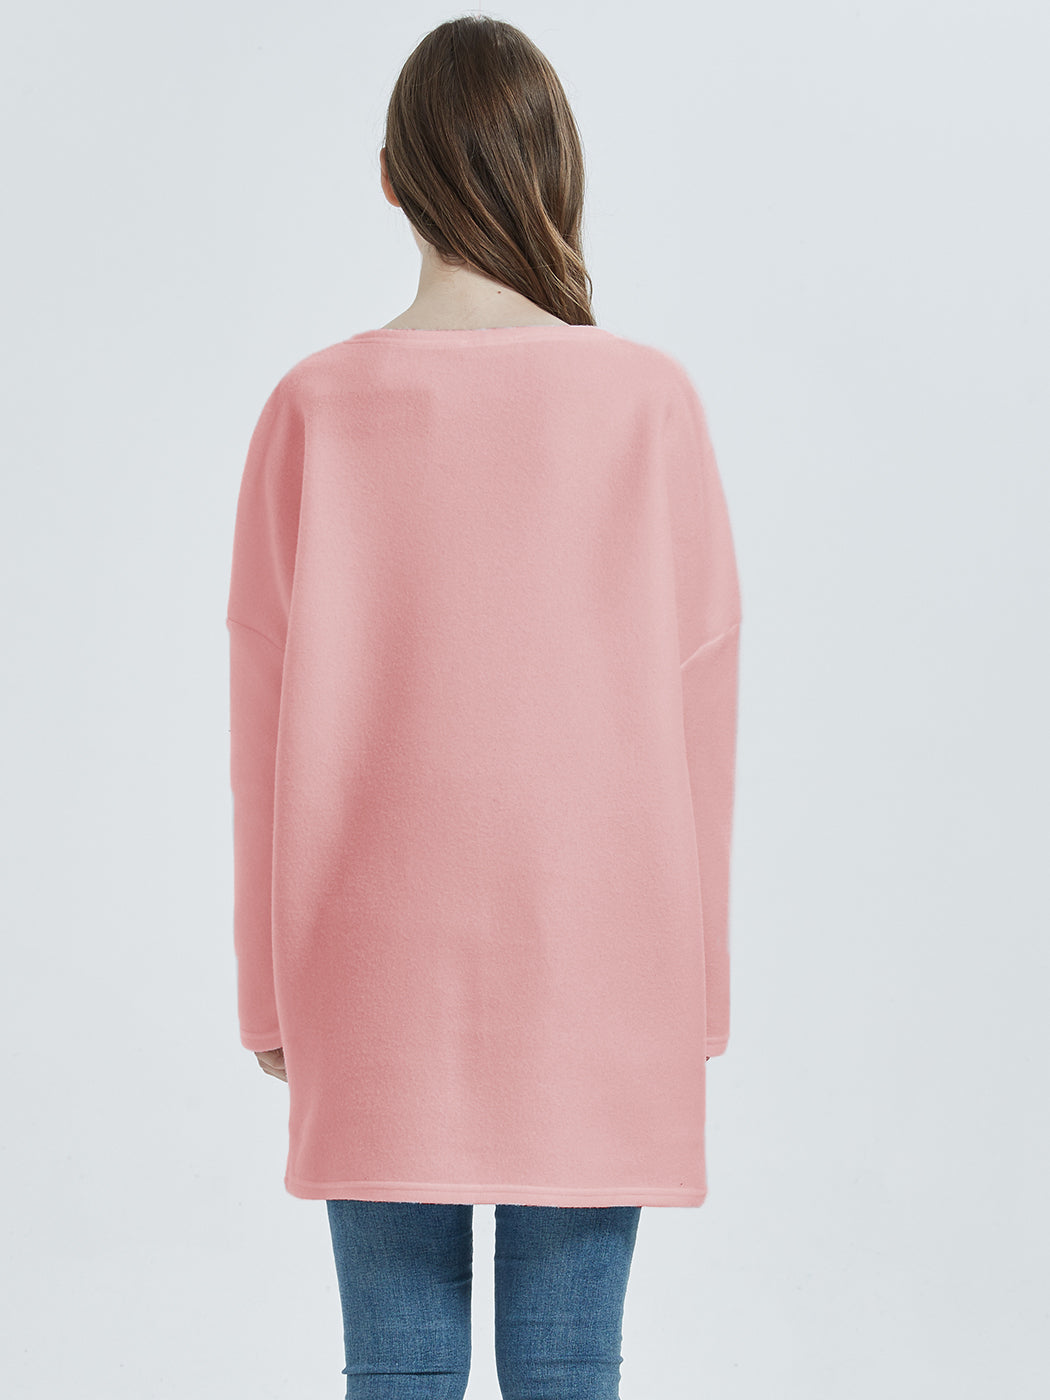 Batwing Sleeve V-Neck Soft Sweater Pullover